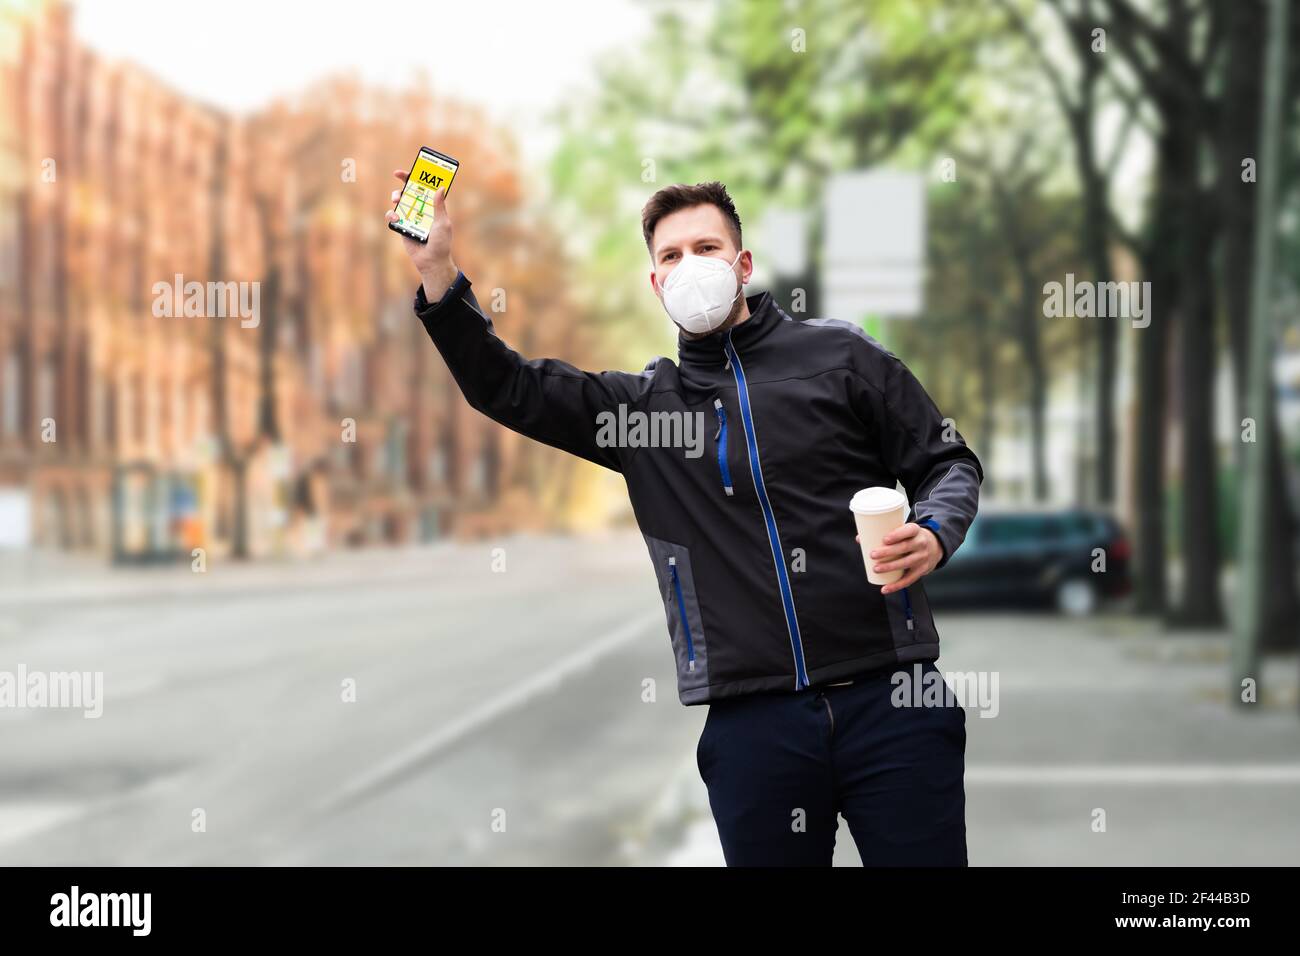 Calling Taxi Cab Using Phone App. Hailing And Stopping Using Arm Stock Photo